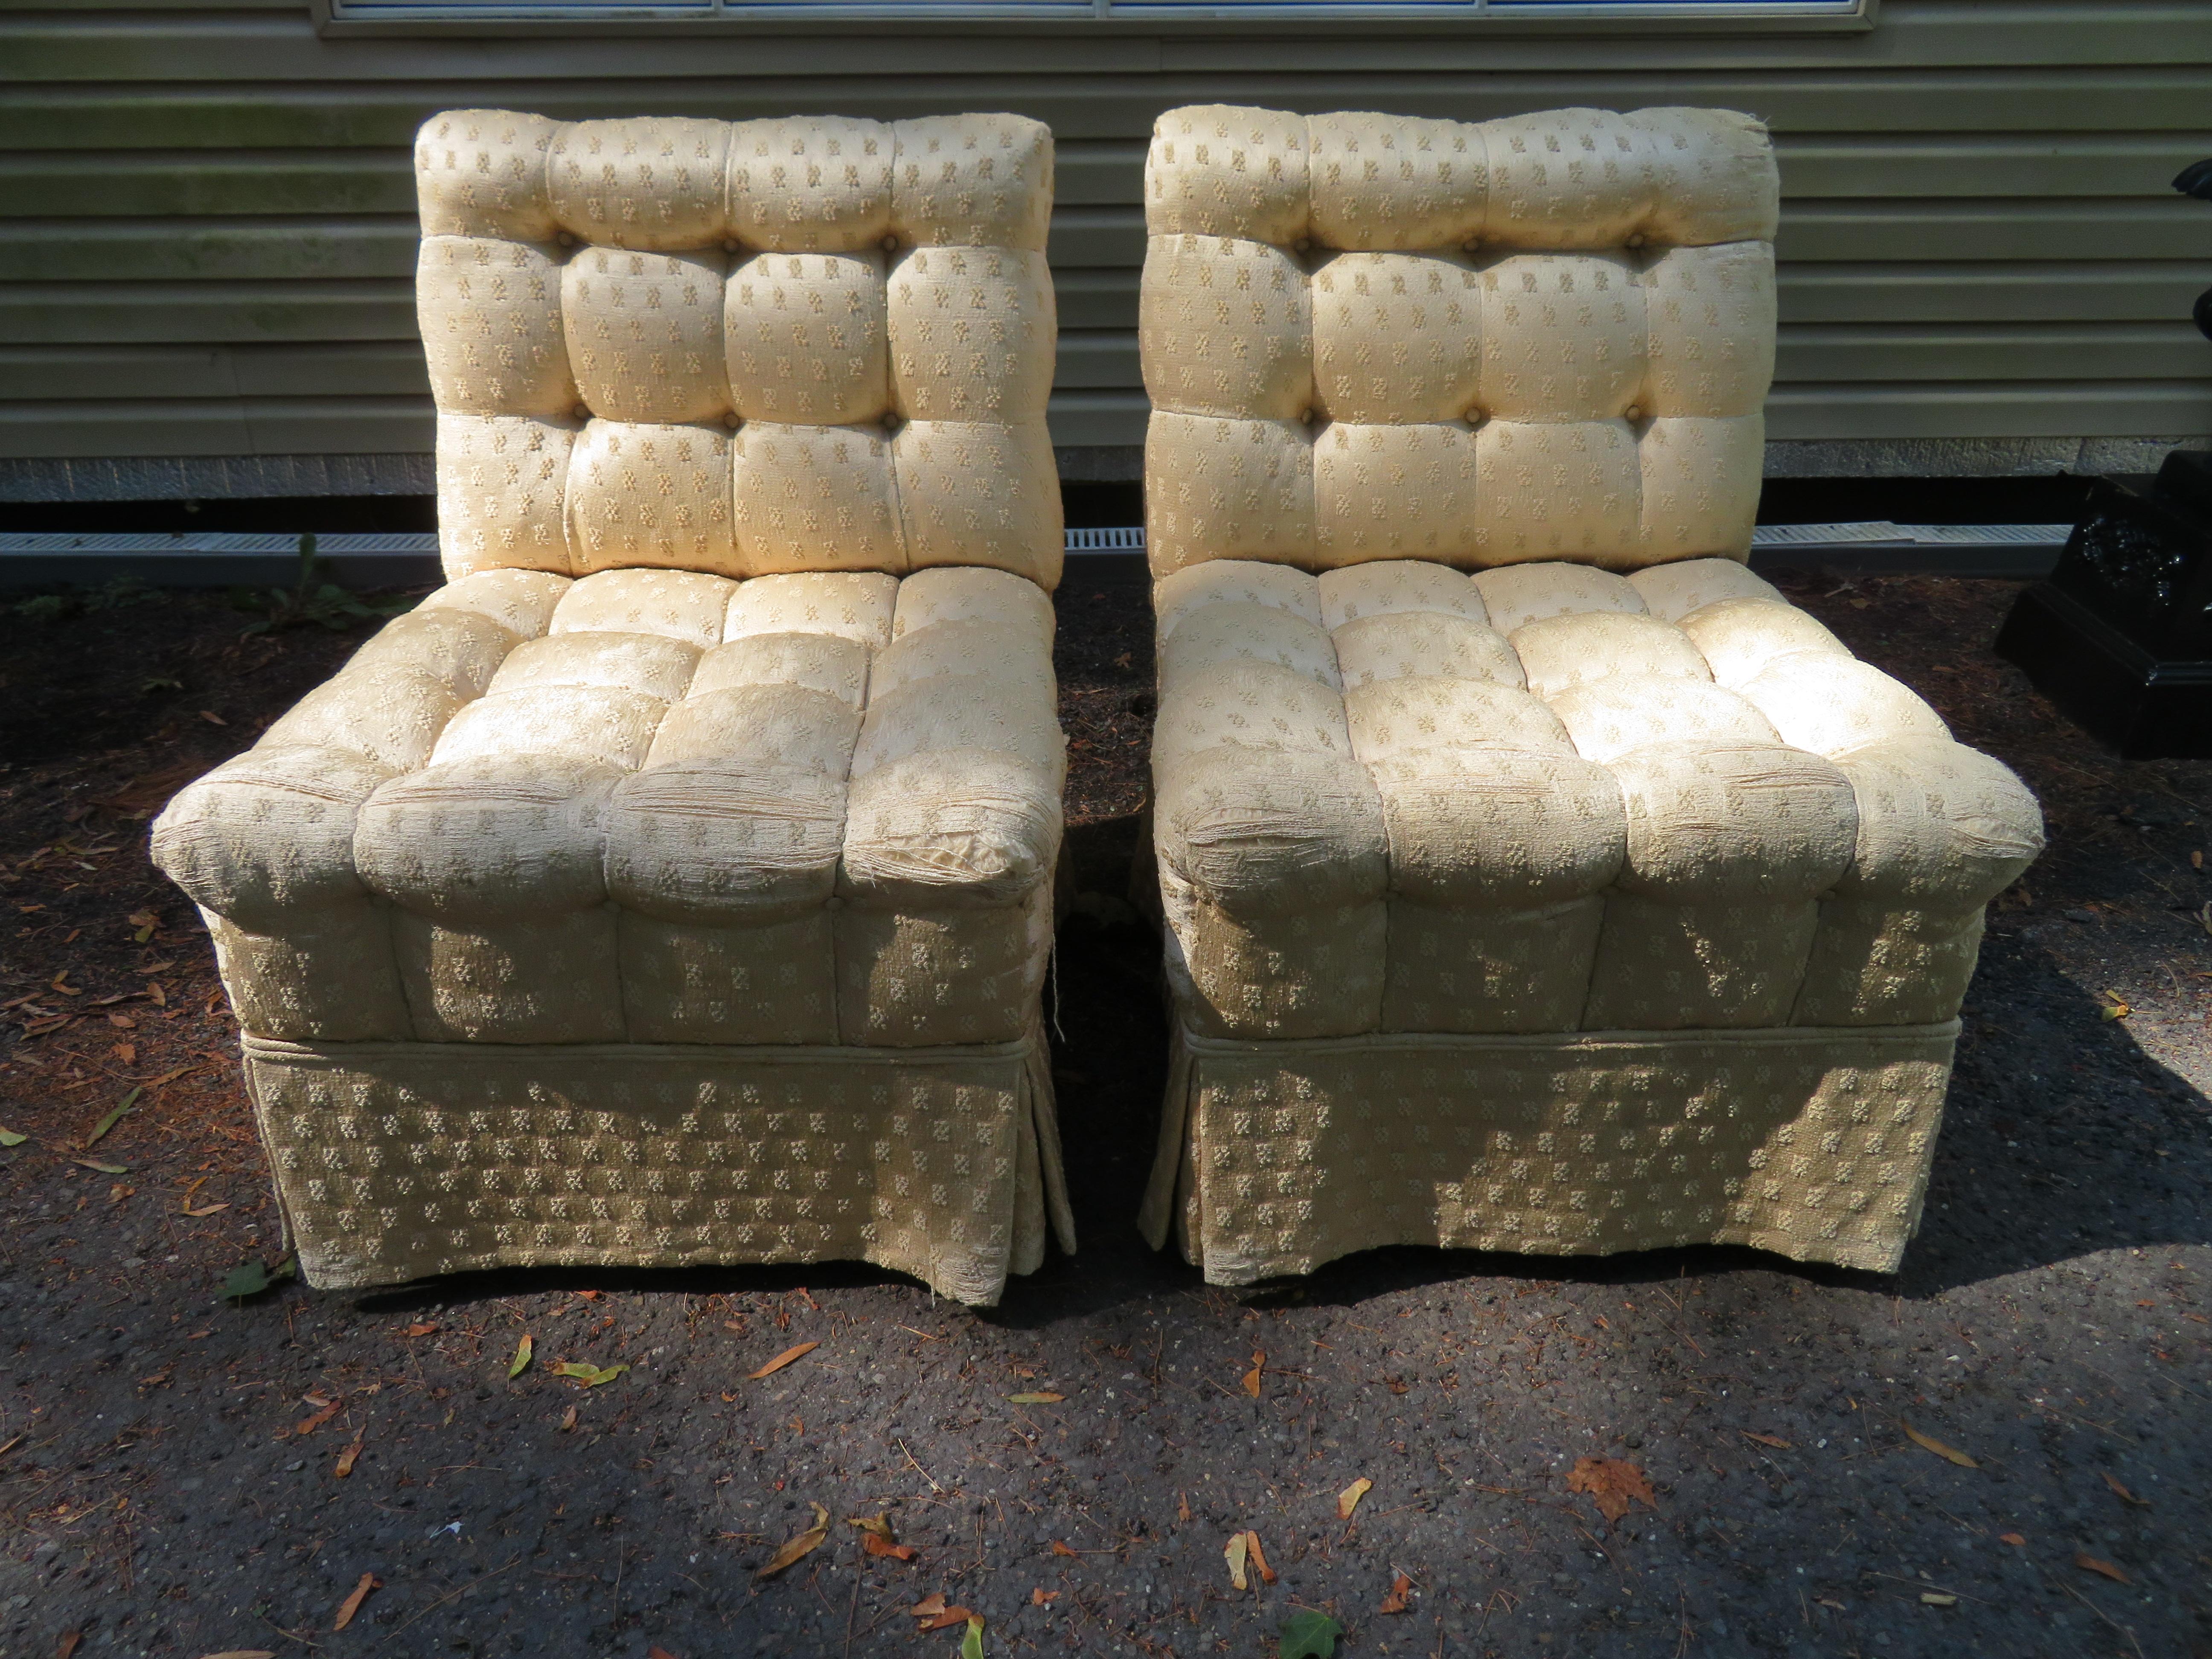 Fabulous pair of Dorothy Draper style biscuit tufted slipper chairs. We obtained these chairs along with a whole house full of Hollywood Regency high end furniture-it was like walking into an old Hollywood movie scene.  These chairs measure 35